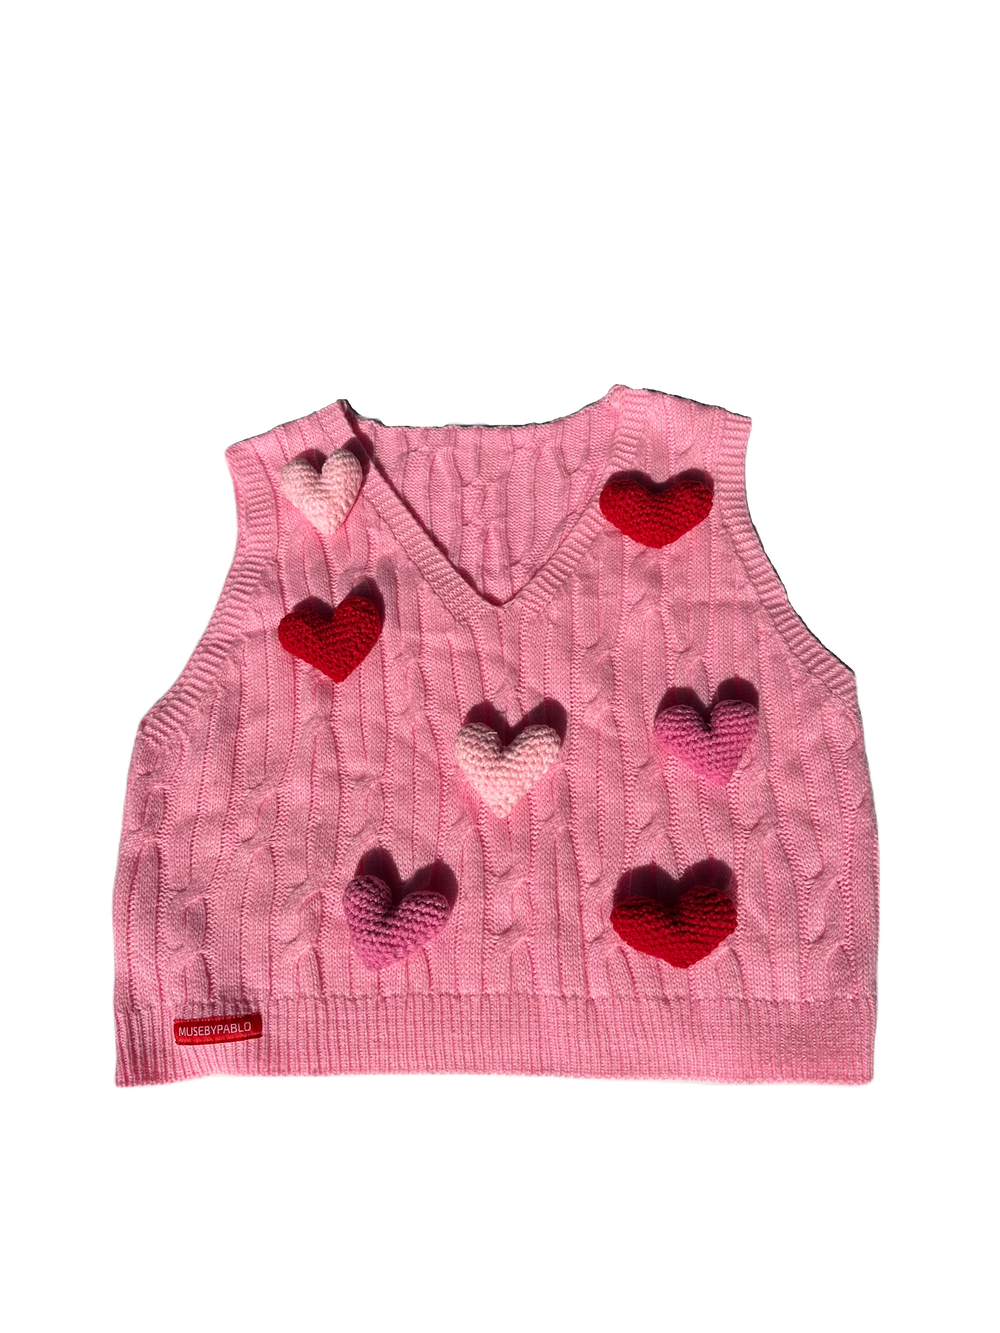 Pink vest adorned with 3D hearts in shades of pink and red.